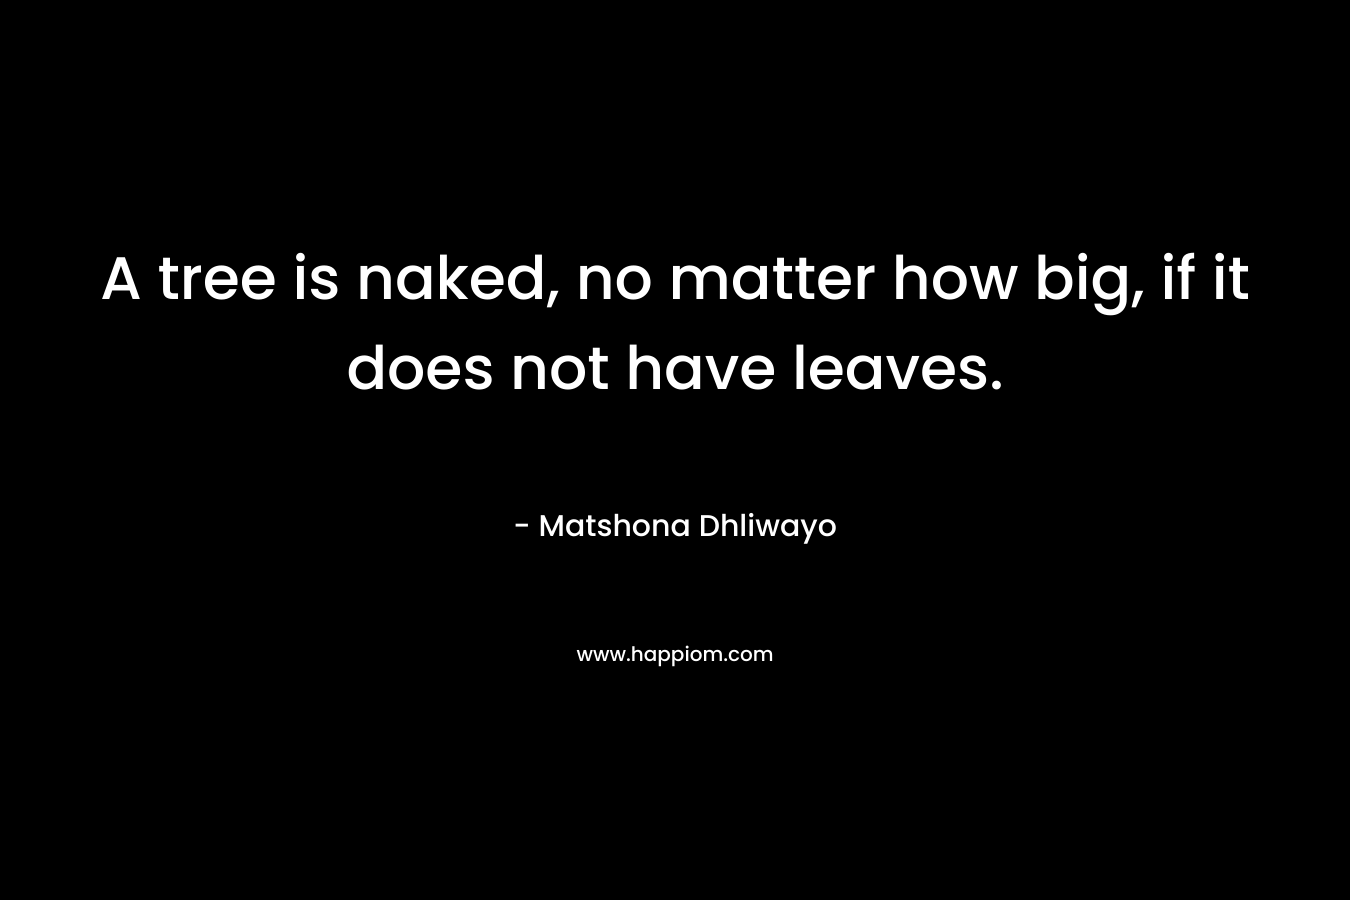 A tree is naked, no matter how big, if it does not have leaves.